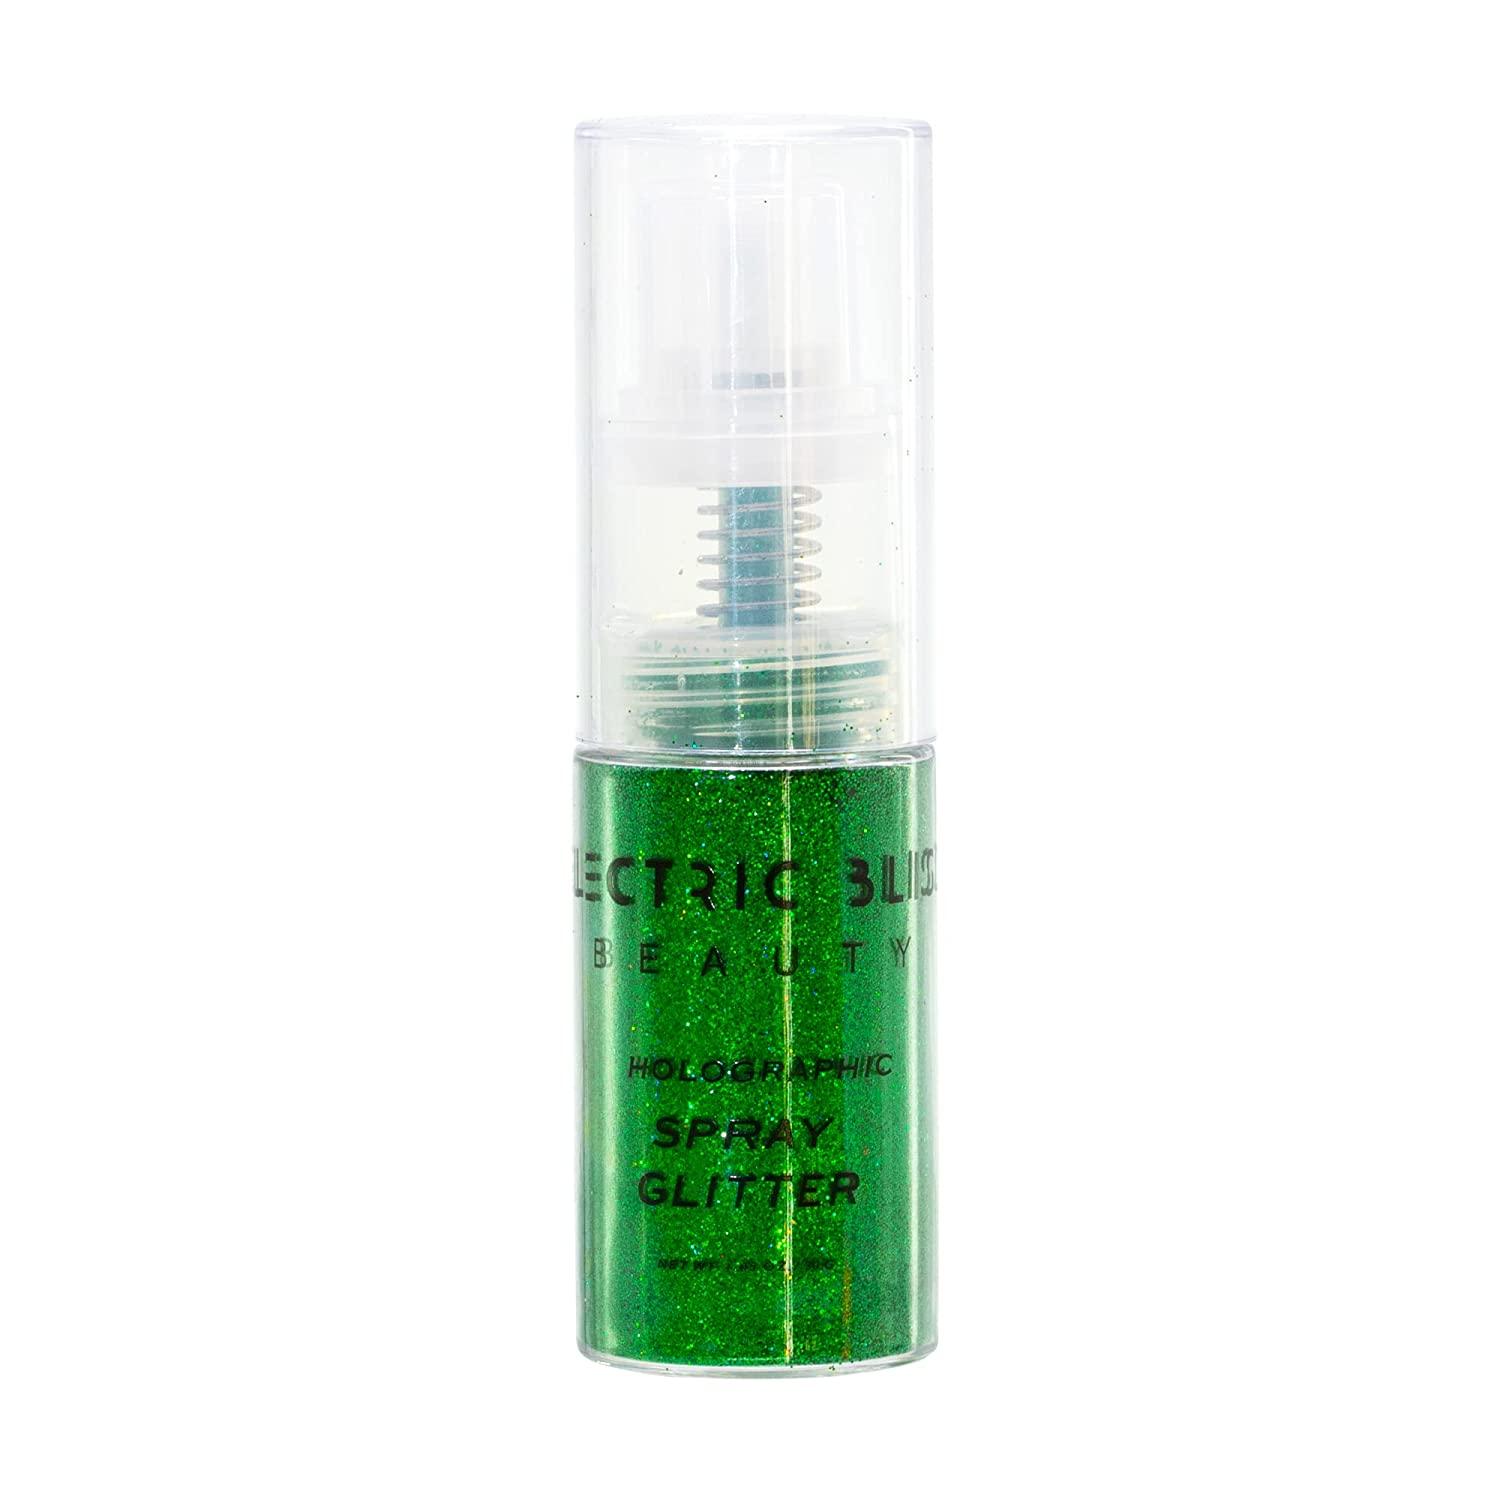 Green - 30 Grams Loose Glitter Spray - Holographic Glitter Spray - Cosmetic  Grade - Makeup Face Body Nail Festival Rave Beauty Craft (Green)